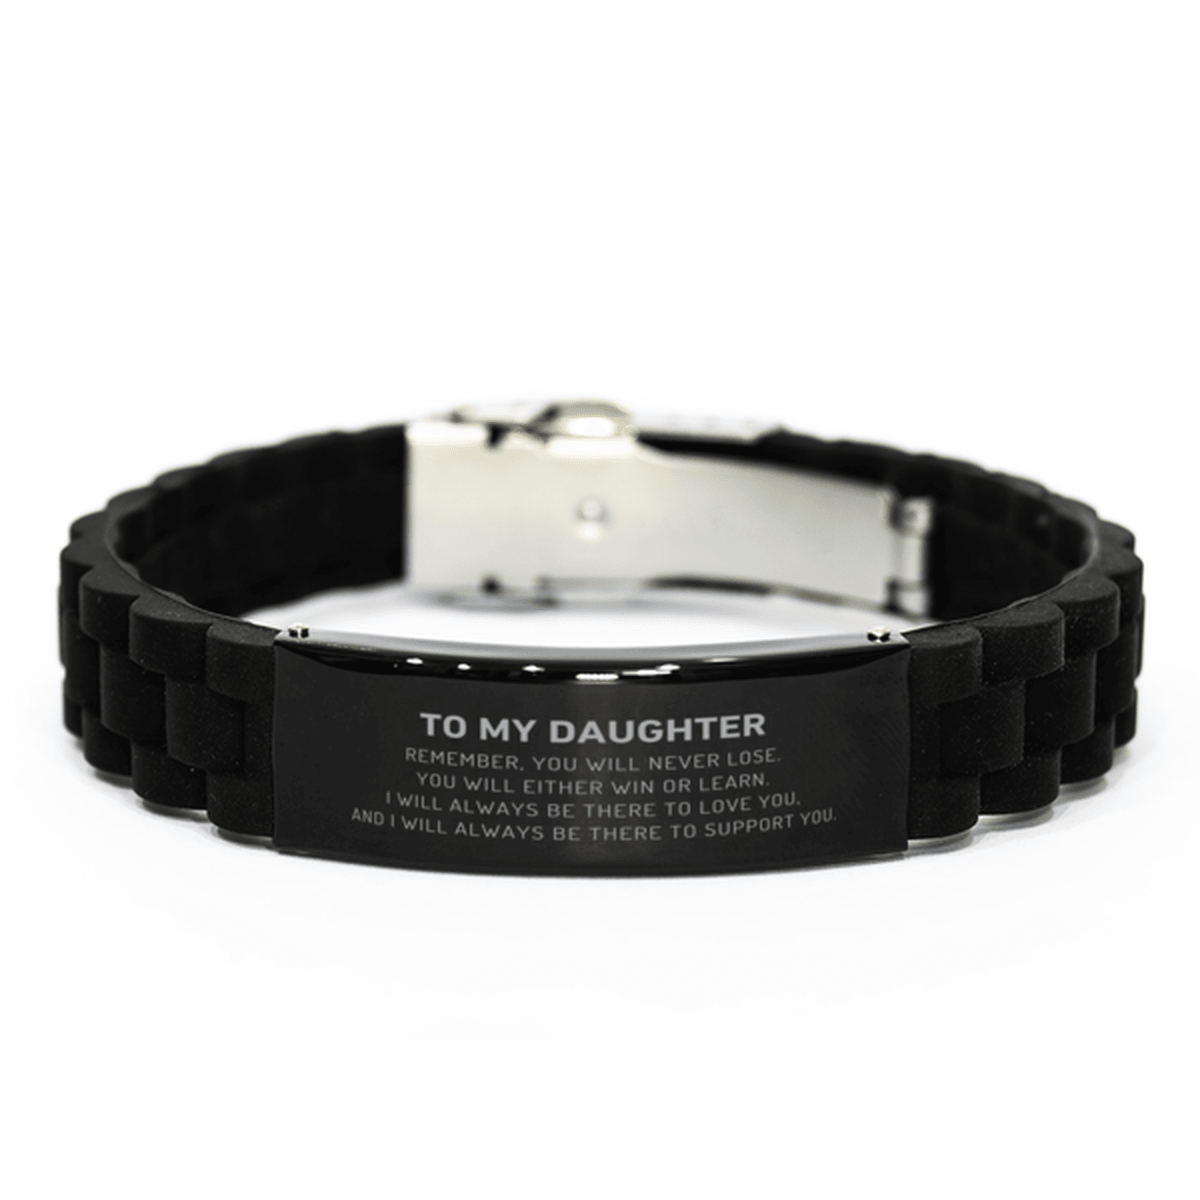 Daughter Gifts, To My Daughter Remember, you will never lose. You will either WIN or LEARN, Keepsake Black Glidelock Clasp Bracelet For Daughter Engraved, Birthday Christmas Gifts Ideas For Daughter X-mas Gifts